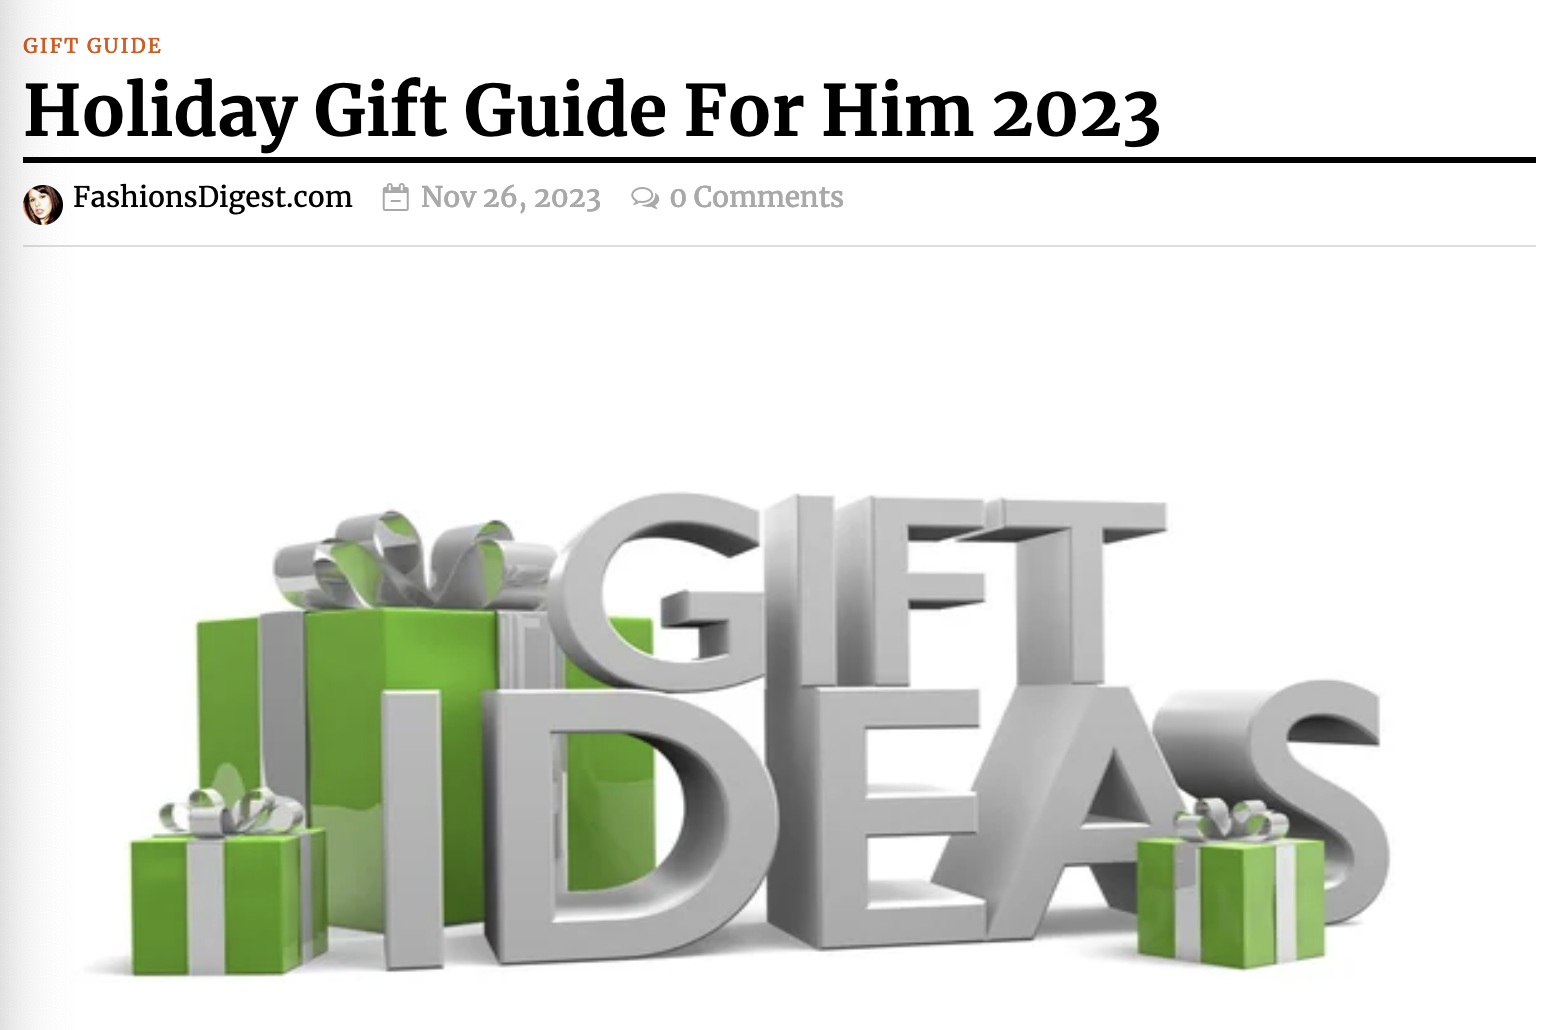 Holiday Gift Guide for Him 2023